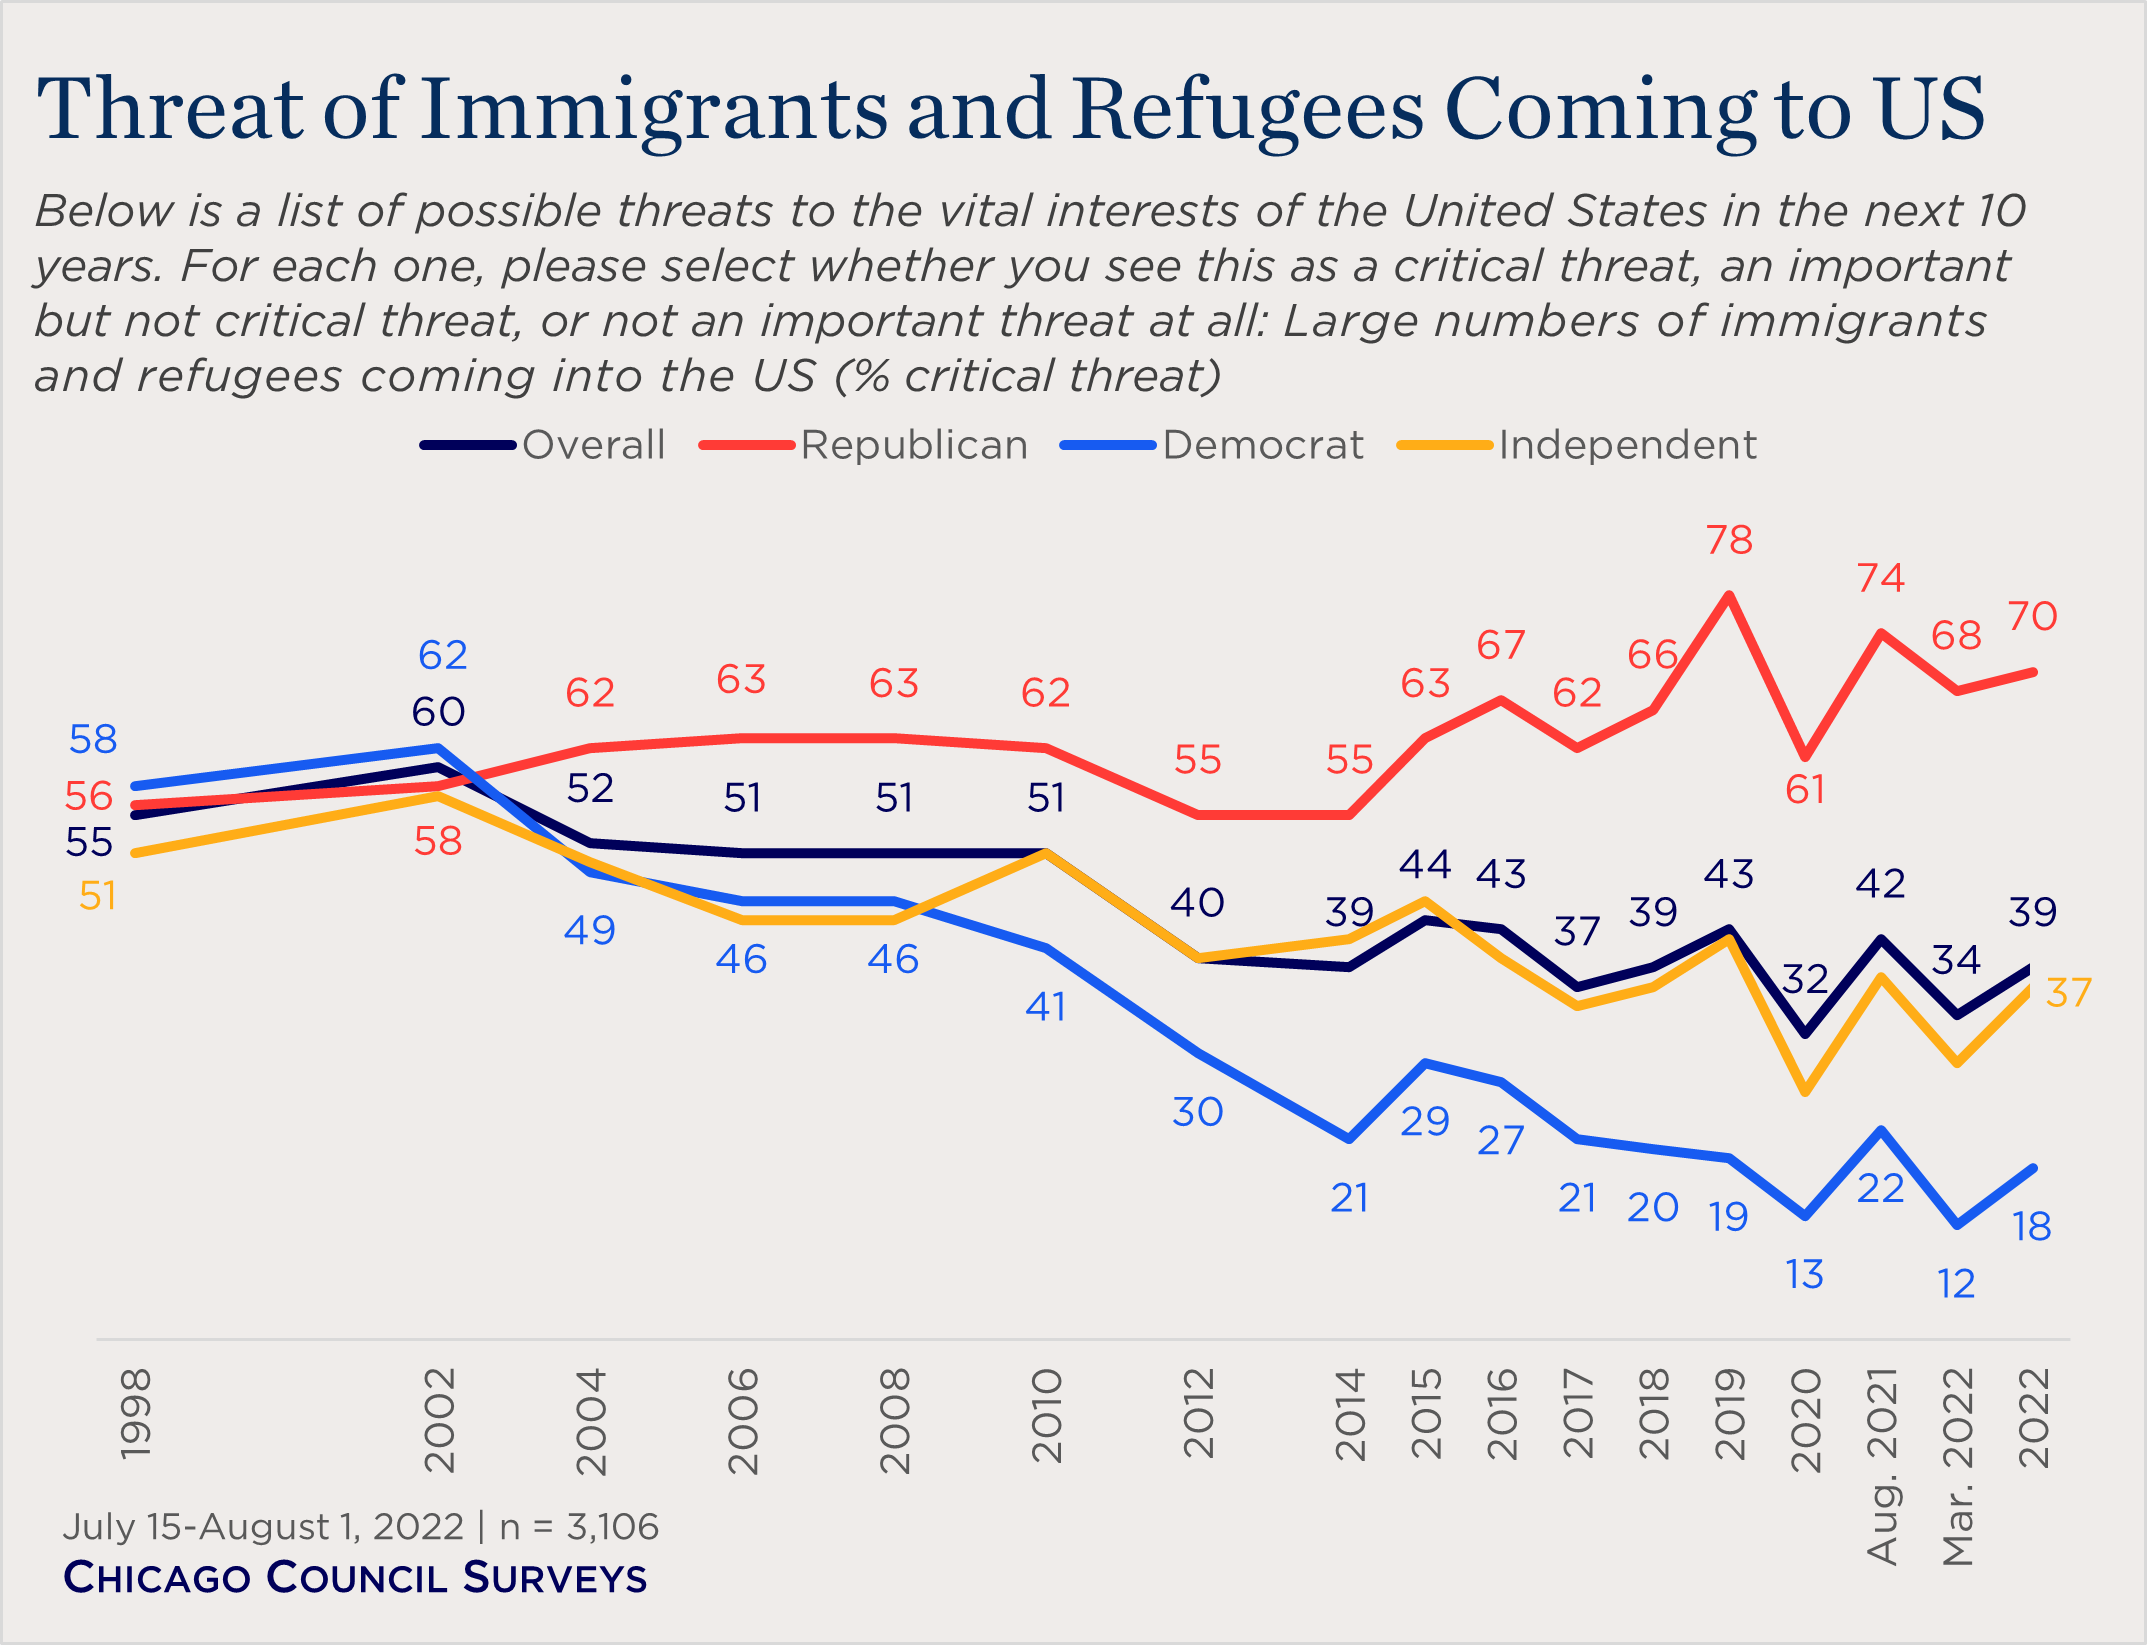 "line chart showing partisan views of immigration as a critical threat"